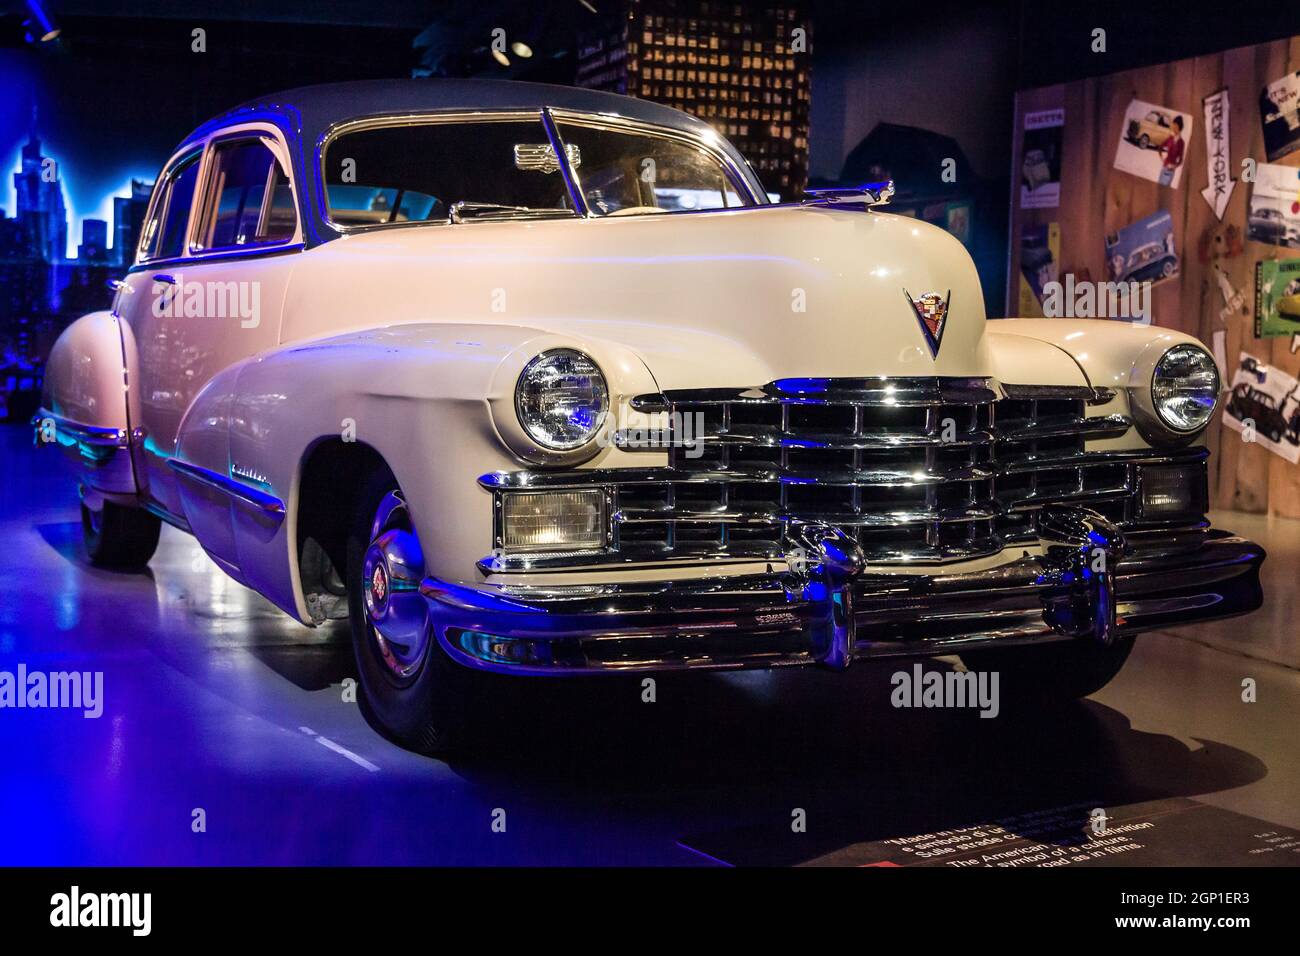 Torino, Italy - August 13, 2021: 1947 Cadillac 62 showcased at the National Automobile Museum (MAUTO) in Torino, Italy. Stock Photo